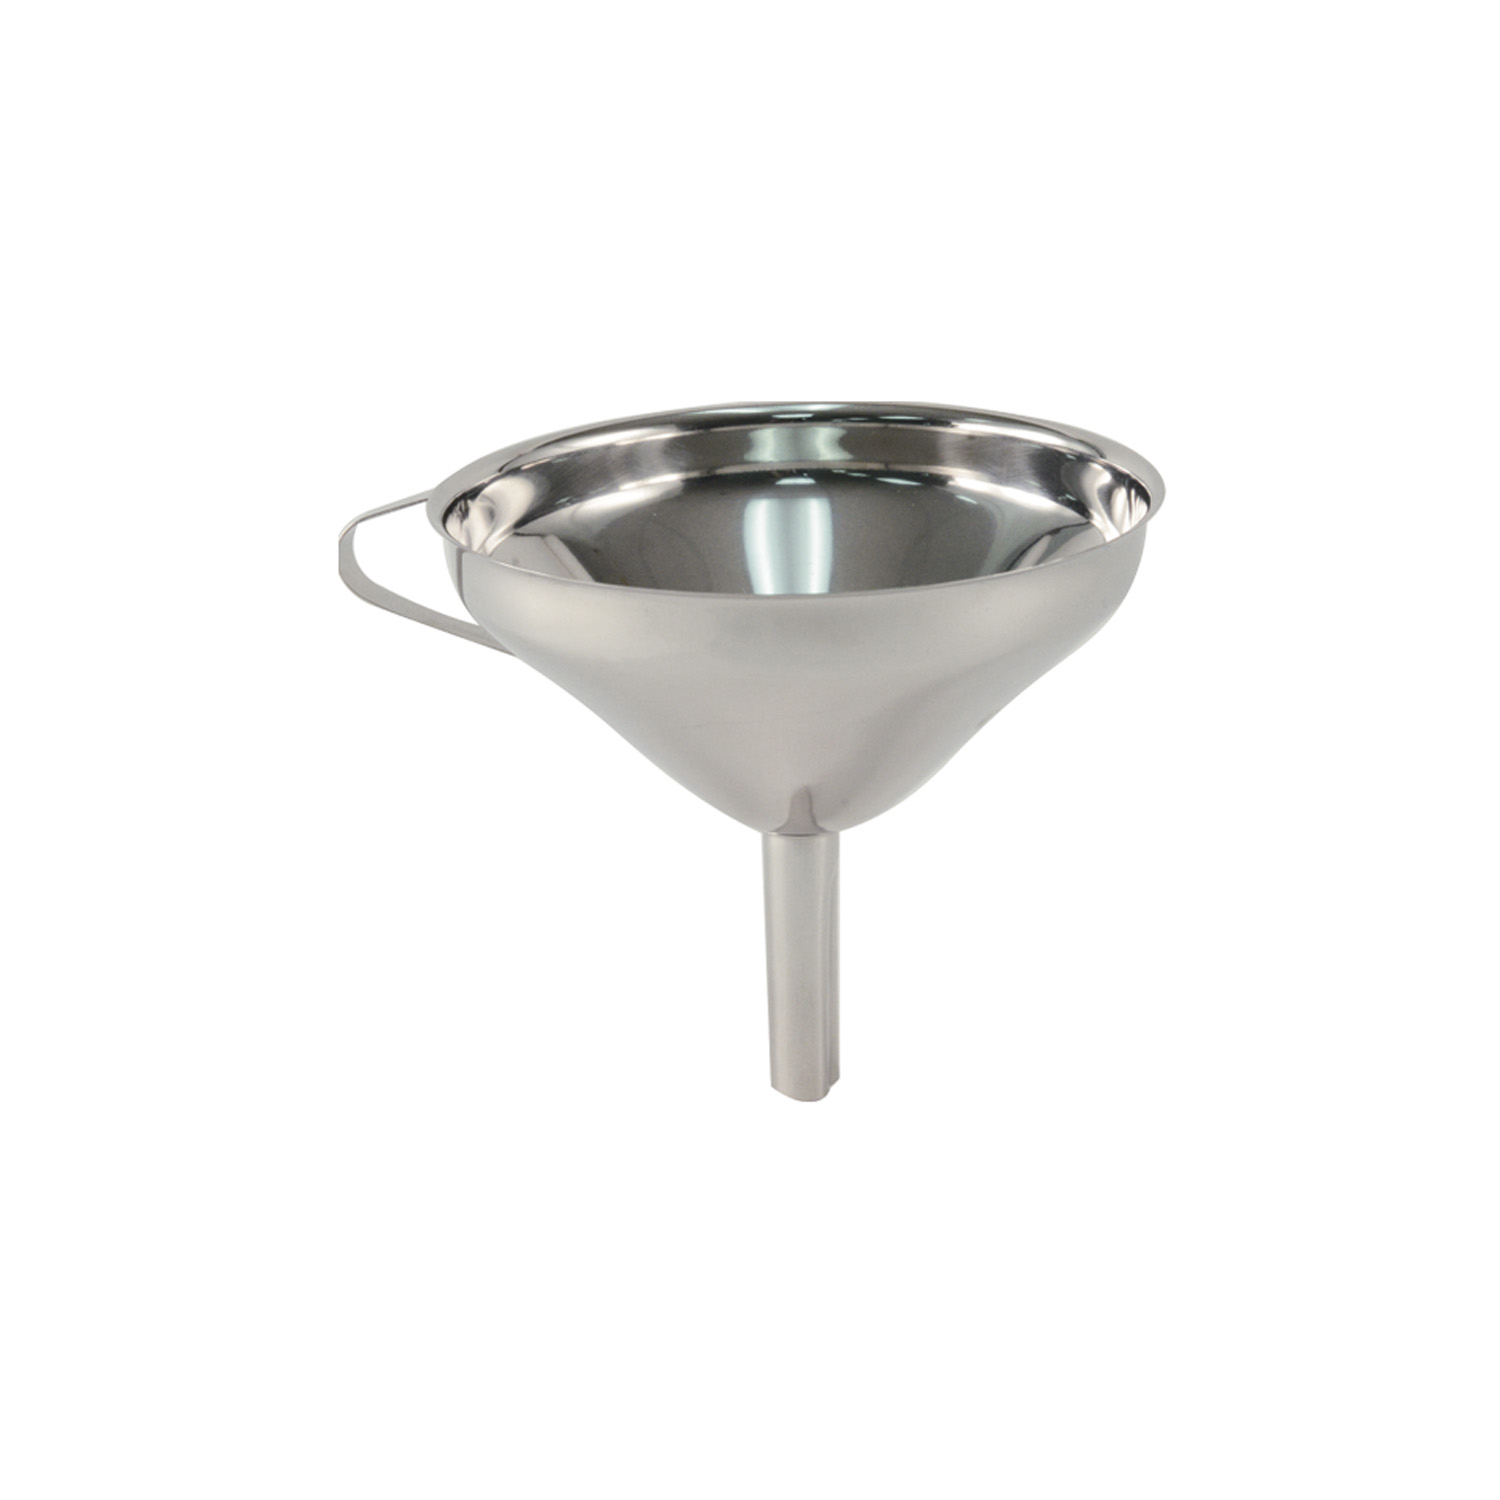 CAC China SFNW-6 Stainless Steel 16 oz. Funnel 5 3/4" Dia.